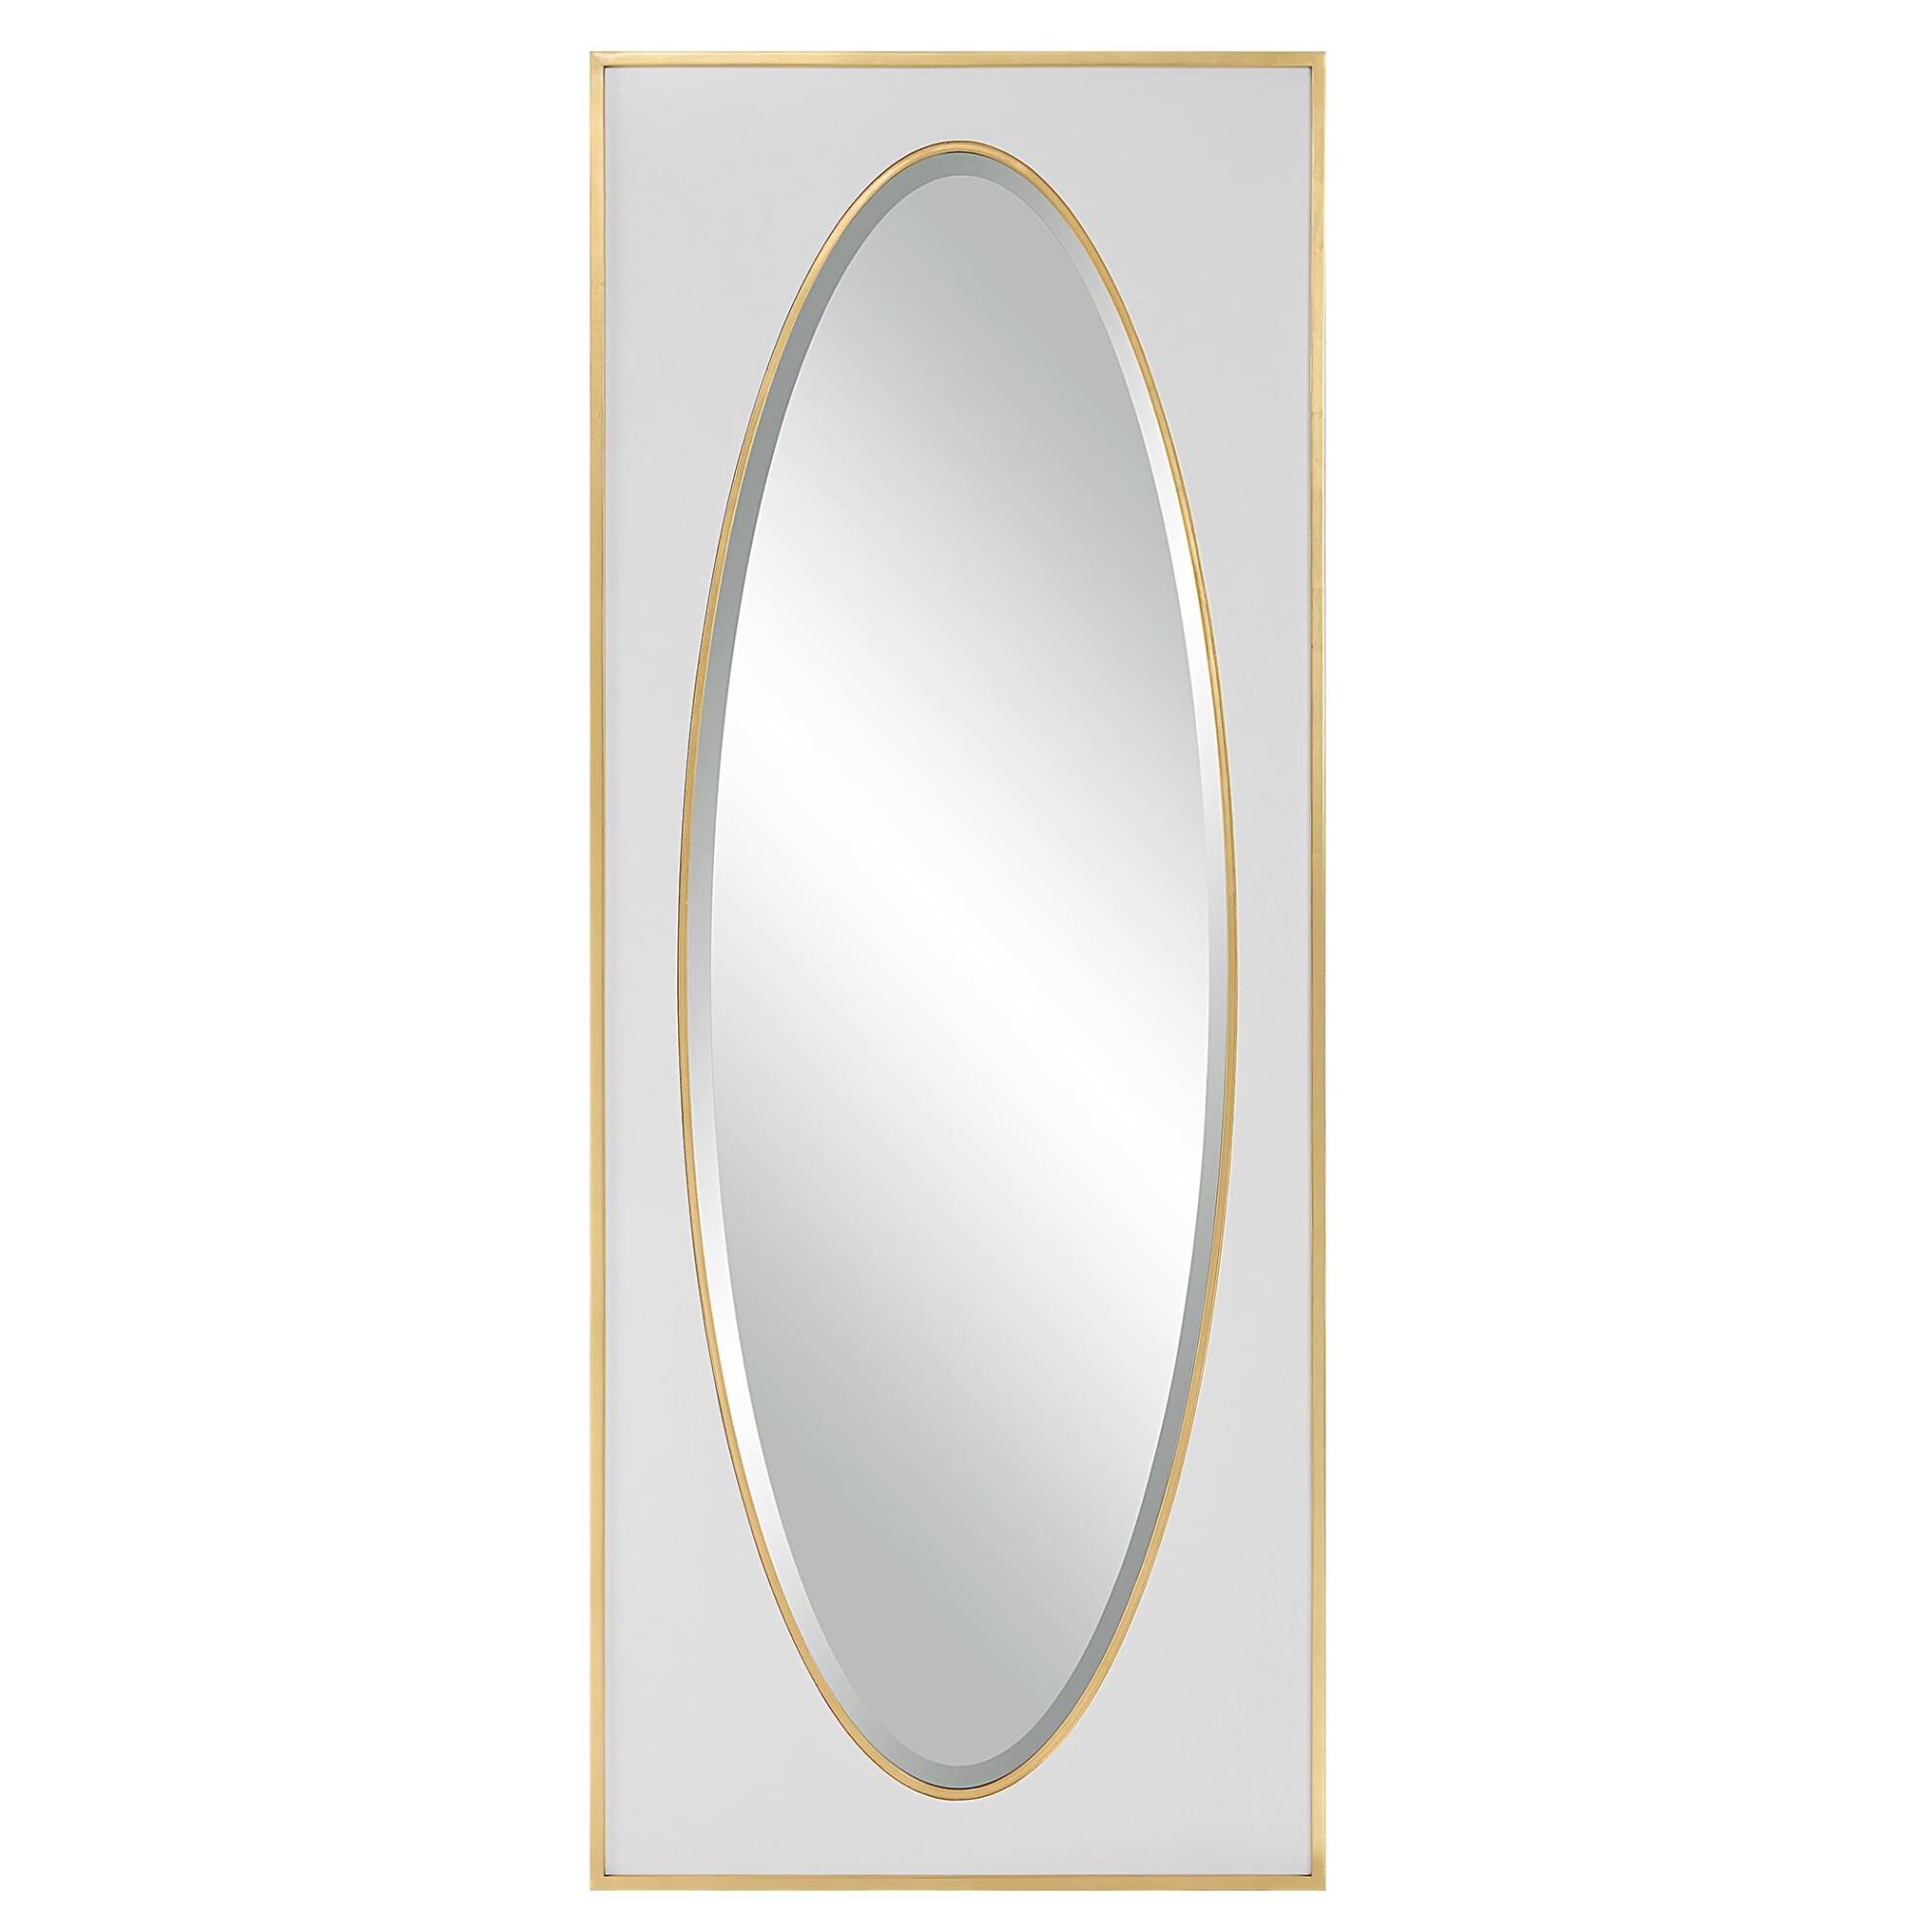 Uttermost Mirrors Sailor's Knot White Small Round Mirror 09824